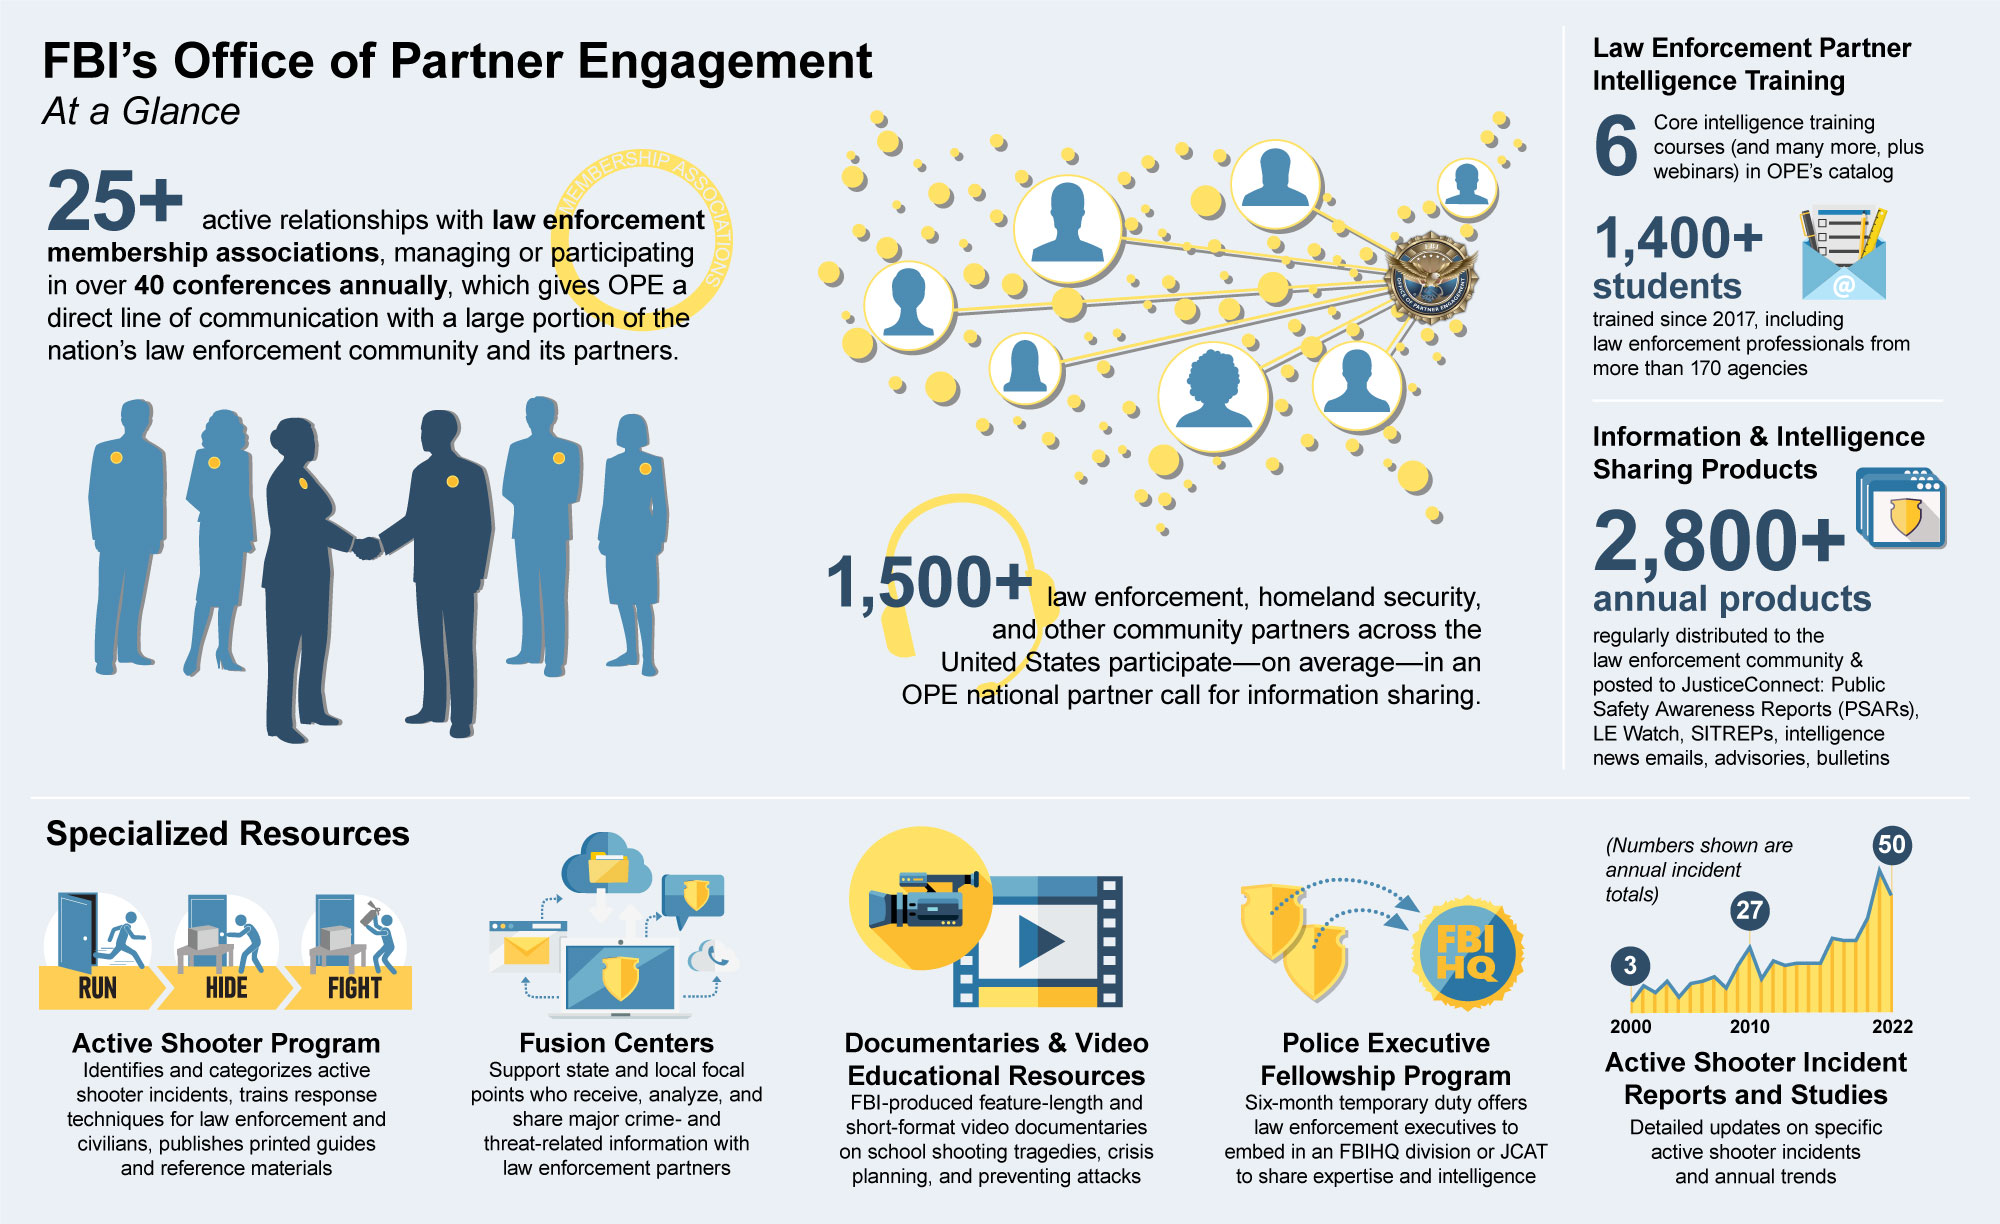 FBI’s Office of Partner Engagement
At a Glance

20+ active relationships with law enforcement membership associations, giving OPE a direct line of communication with a large portion of the nation’s law enforcement community and its partners.

1,500+ law enforcement, homeland security, and other community partners across the United States participate, on average, in an OPE critical incident call for information sharing.

Enhanced Engagement ​​​​​​​Intelligence Training

10 Intelligence training courses & webinars in OPE’s catalog

1,400+ students trained since 2017, including FBI and law enforcement professionals from more than 170 agencies

Information & Intelligence Sharing Products

1,100+ regularly distributed to the law enforcement community: Public Safety Awareness Reports (PSARs), LE Watch, SITREPs, intelligence news emails, advisories, bulletins

Specialized Resources

Active Shooter ProgramIdentifies and categorizes active shooter incidents, trains response techniques for law enforcement and civilians, produces educational and documentary videos

Fusion Centers

Support state and local focal points who receive, analyze, and share major crime- and threat-related information with law enforcement partners

Police Executive Fellowship Program

Six-month temporary duty offers law enforcement executives to embed in an FBIHQ division or JCAT and share expertise, intelligence

eGuardian InitiativeSystem

Allows law enforcement agencies to combine new suspicious activity reports with existing ones to form a single information repository

Active Shooter Incident Reports and StudiesDetailed updates on specific active shooter incidents and annual trends

2000: 3  
2010: 27  
2021: 61
(Numbers are annual incident totals)